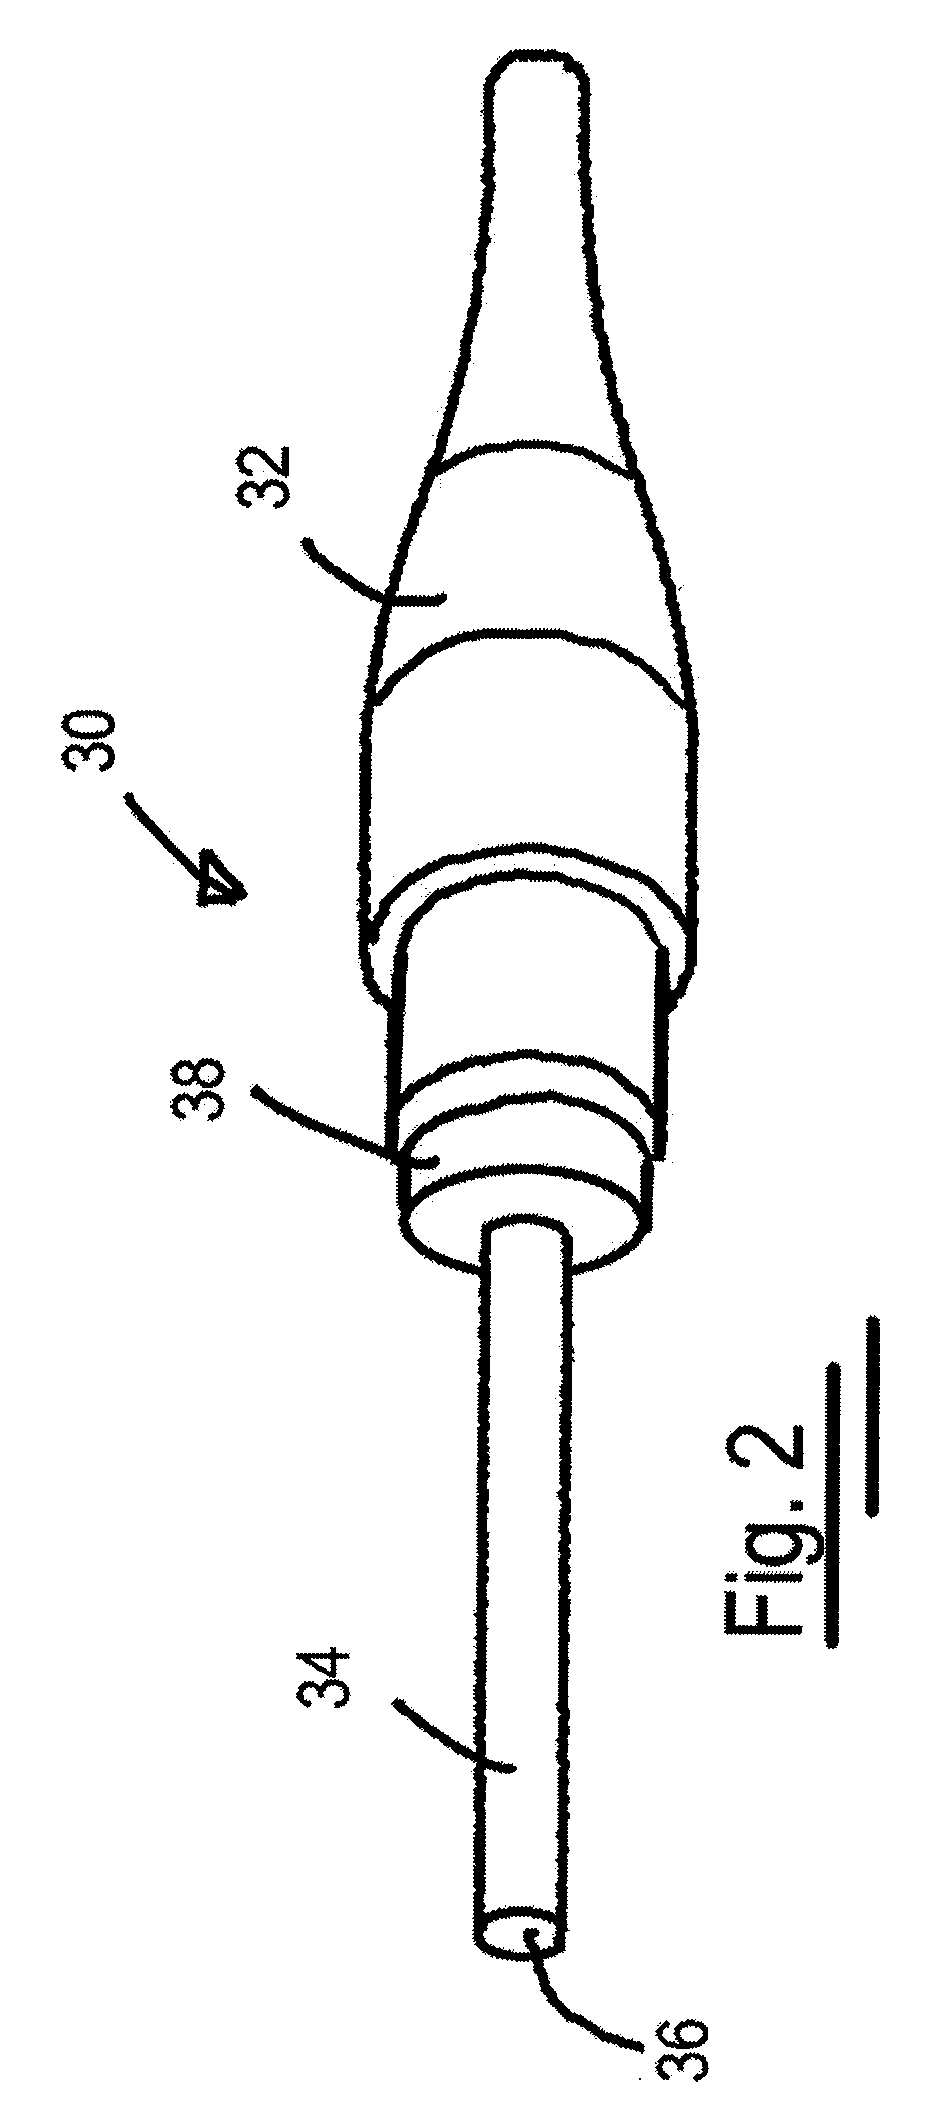 Stent Graft Delivery System and Method of Use